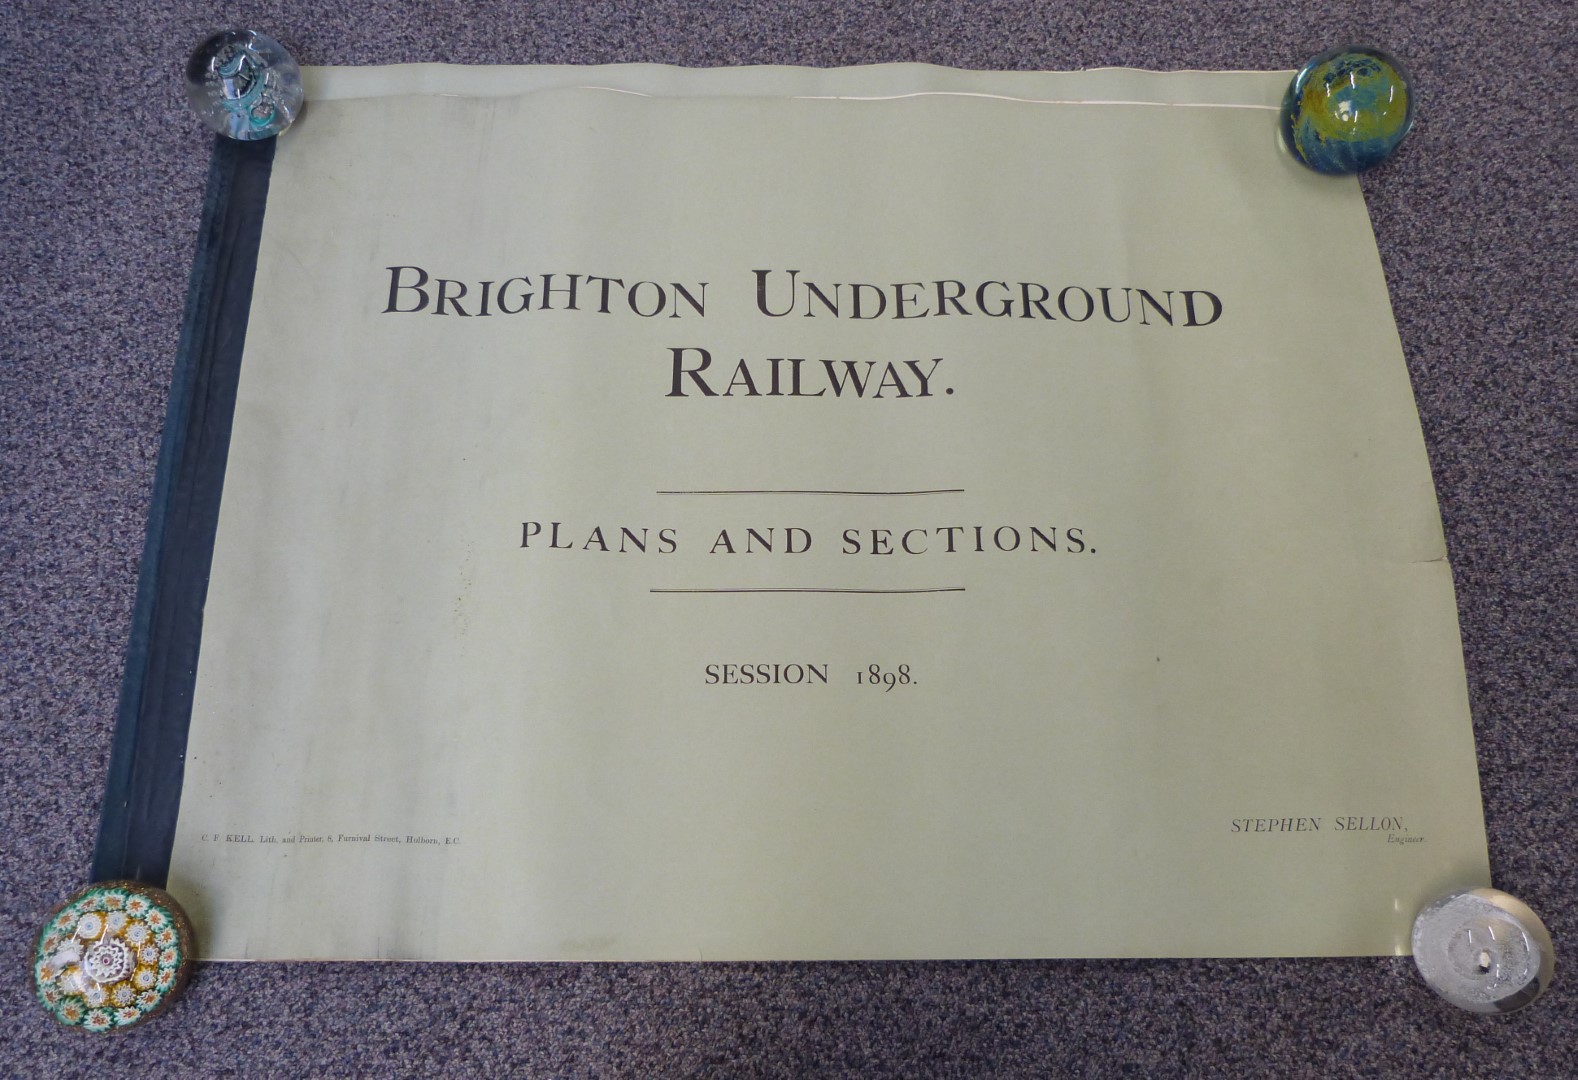 Two bound books of plans and sections relating to the Brighton Underground railway, dated 1898, by